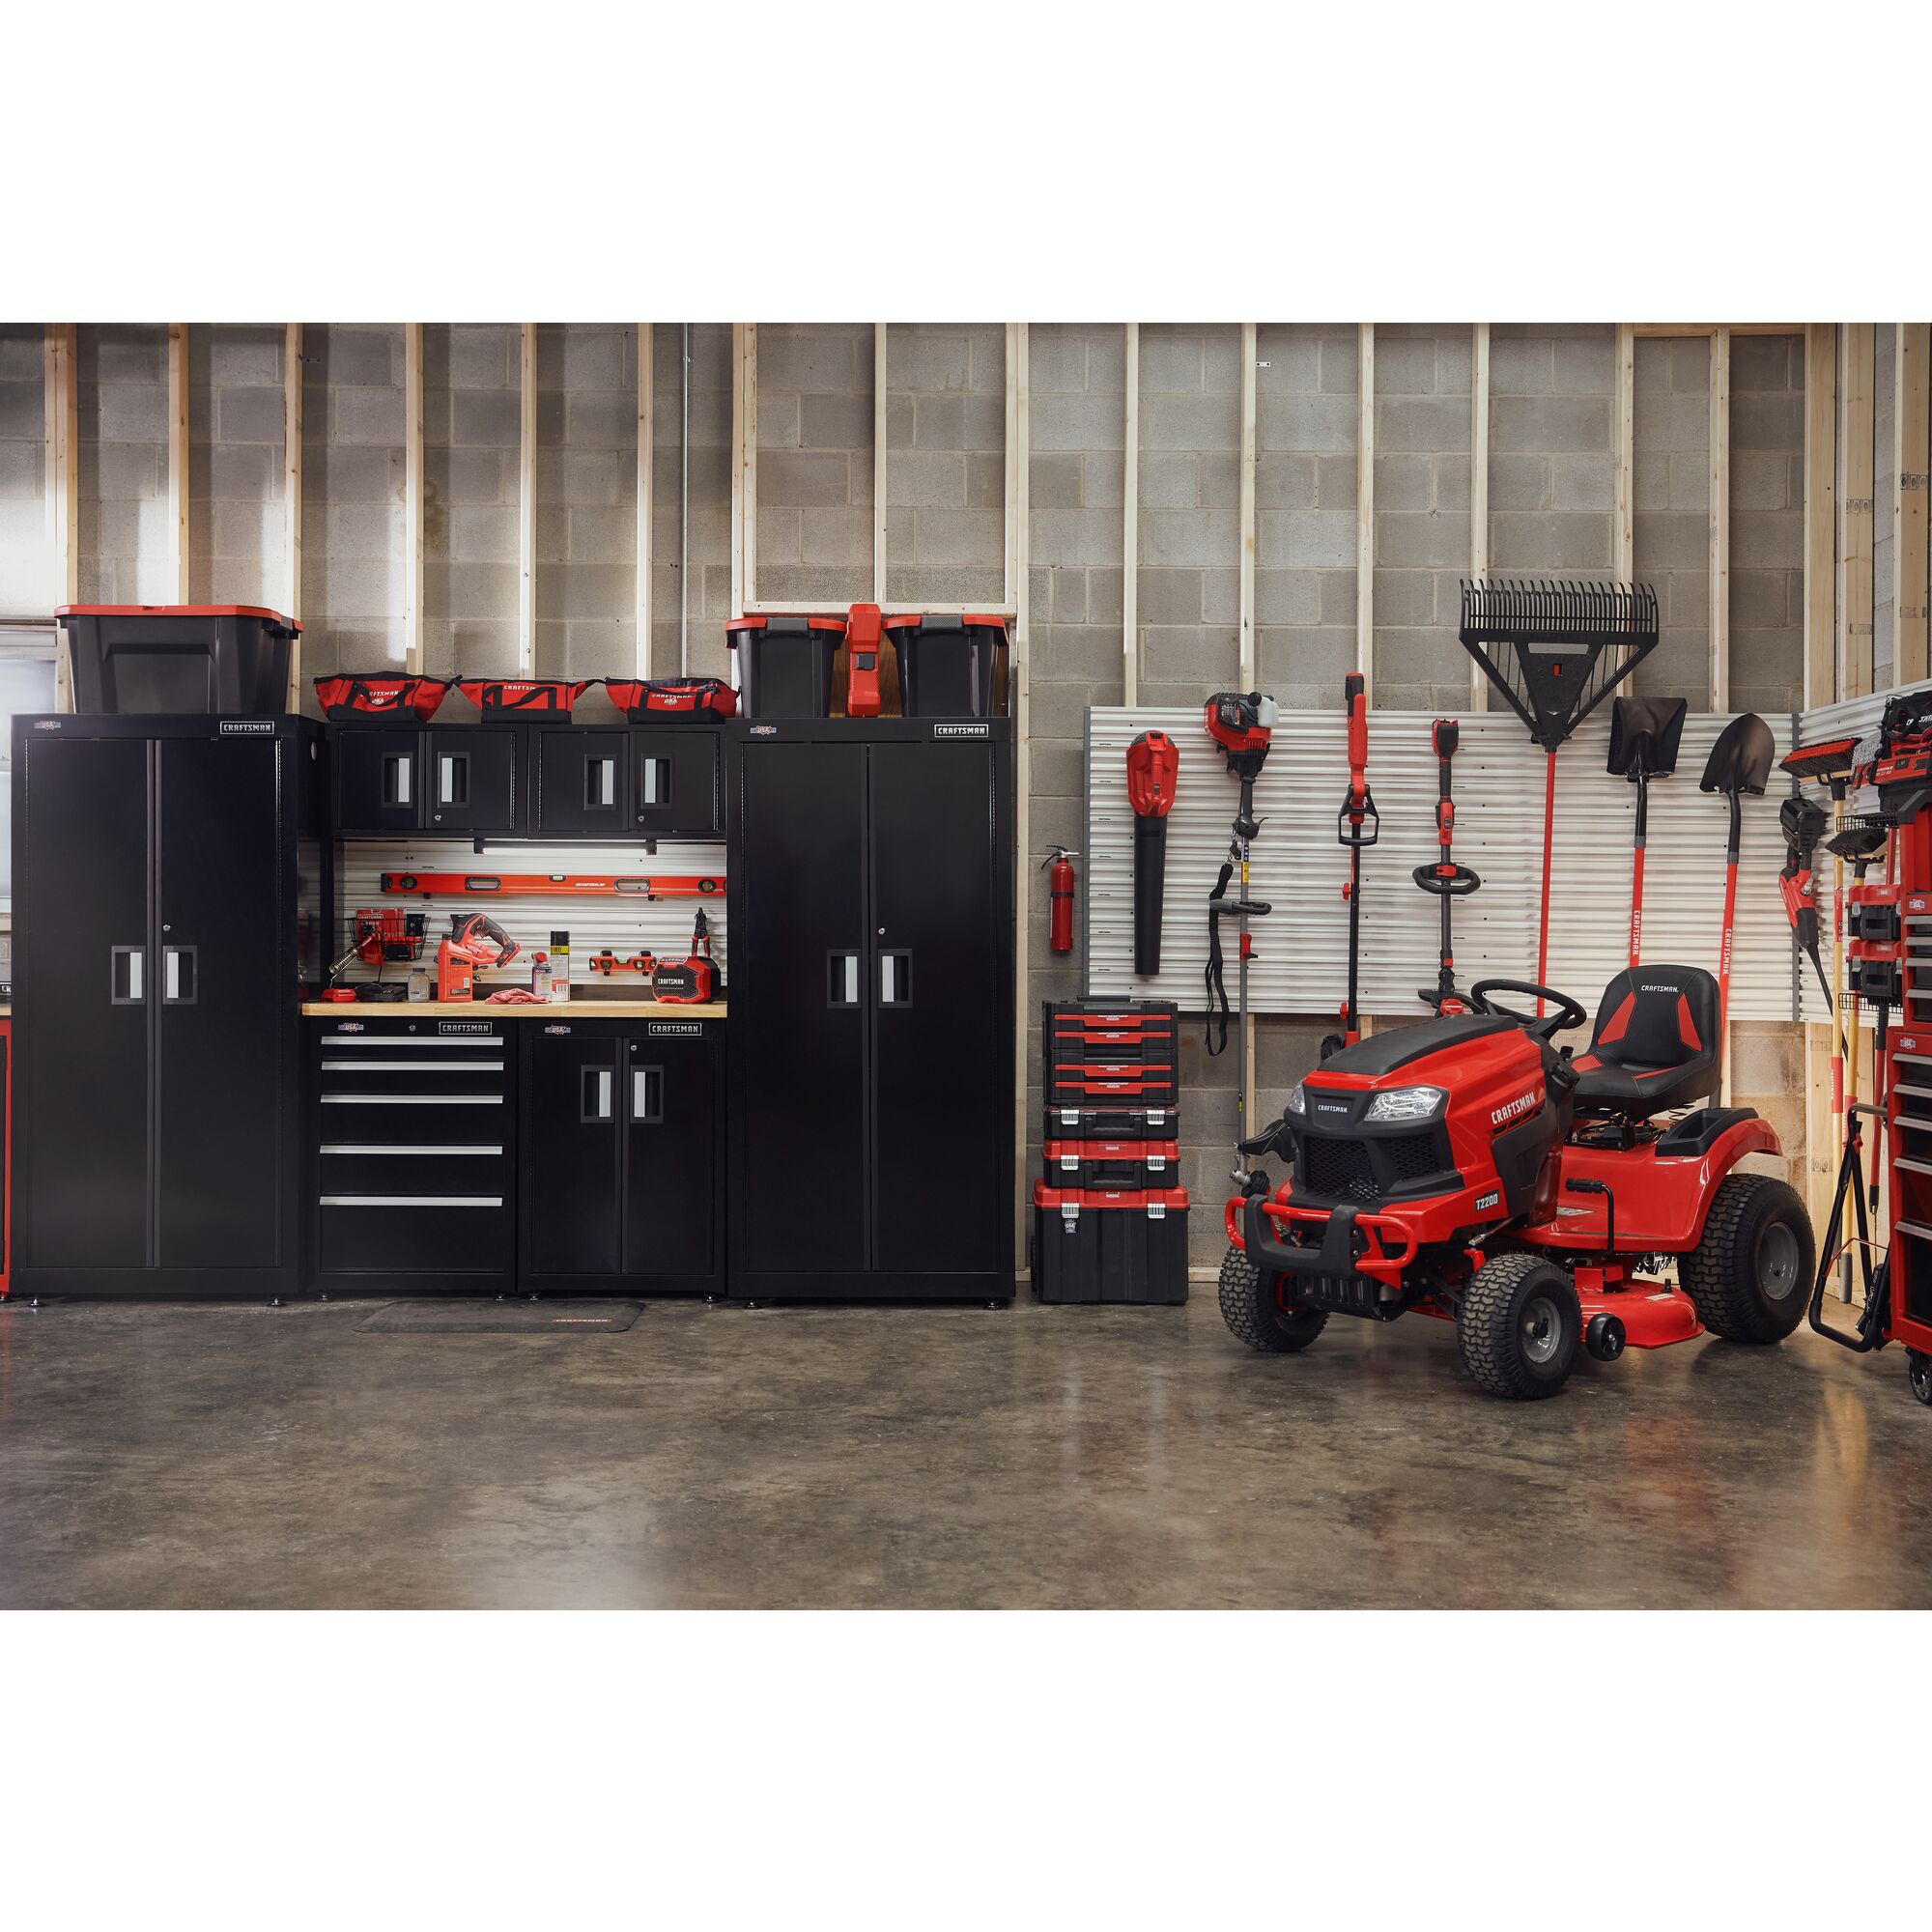 Garage filled with CRAFSTMAN outdoor, storage, and power tools and hand tools